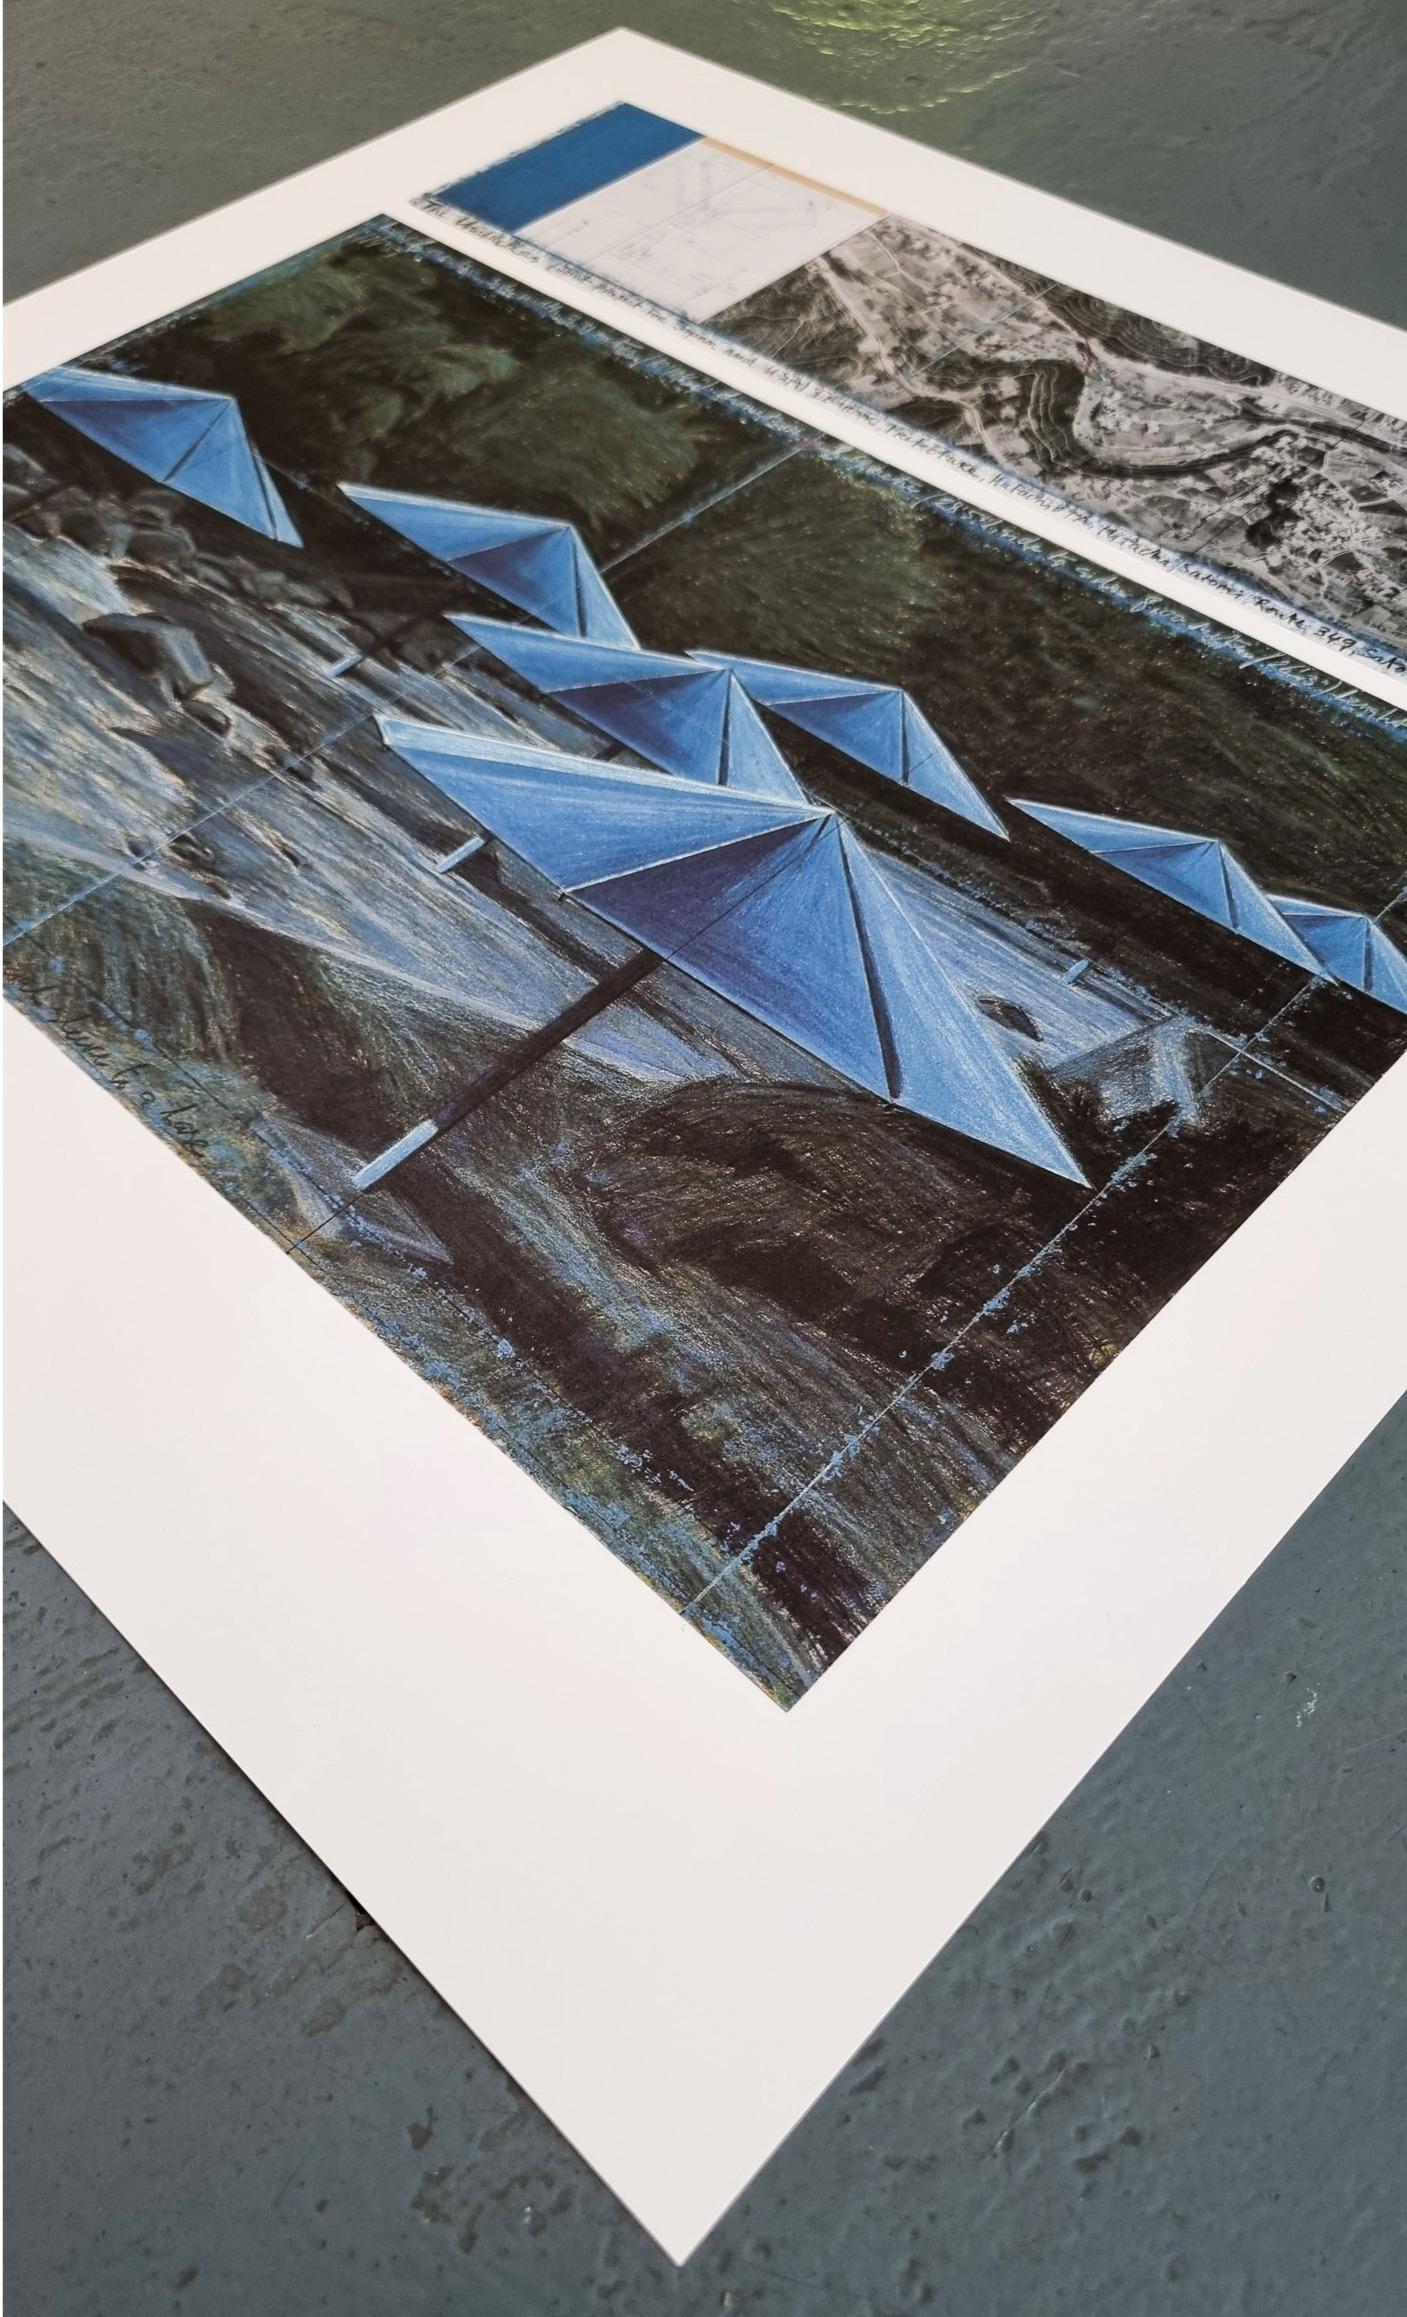 The Umbrellas (Blue) - Modern Print by Christo and Jeanne-Claude